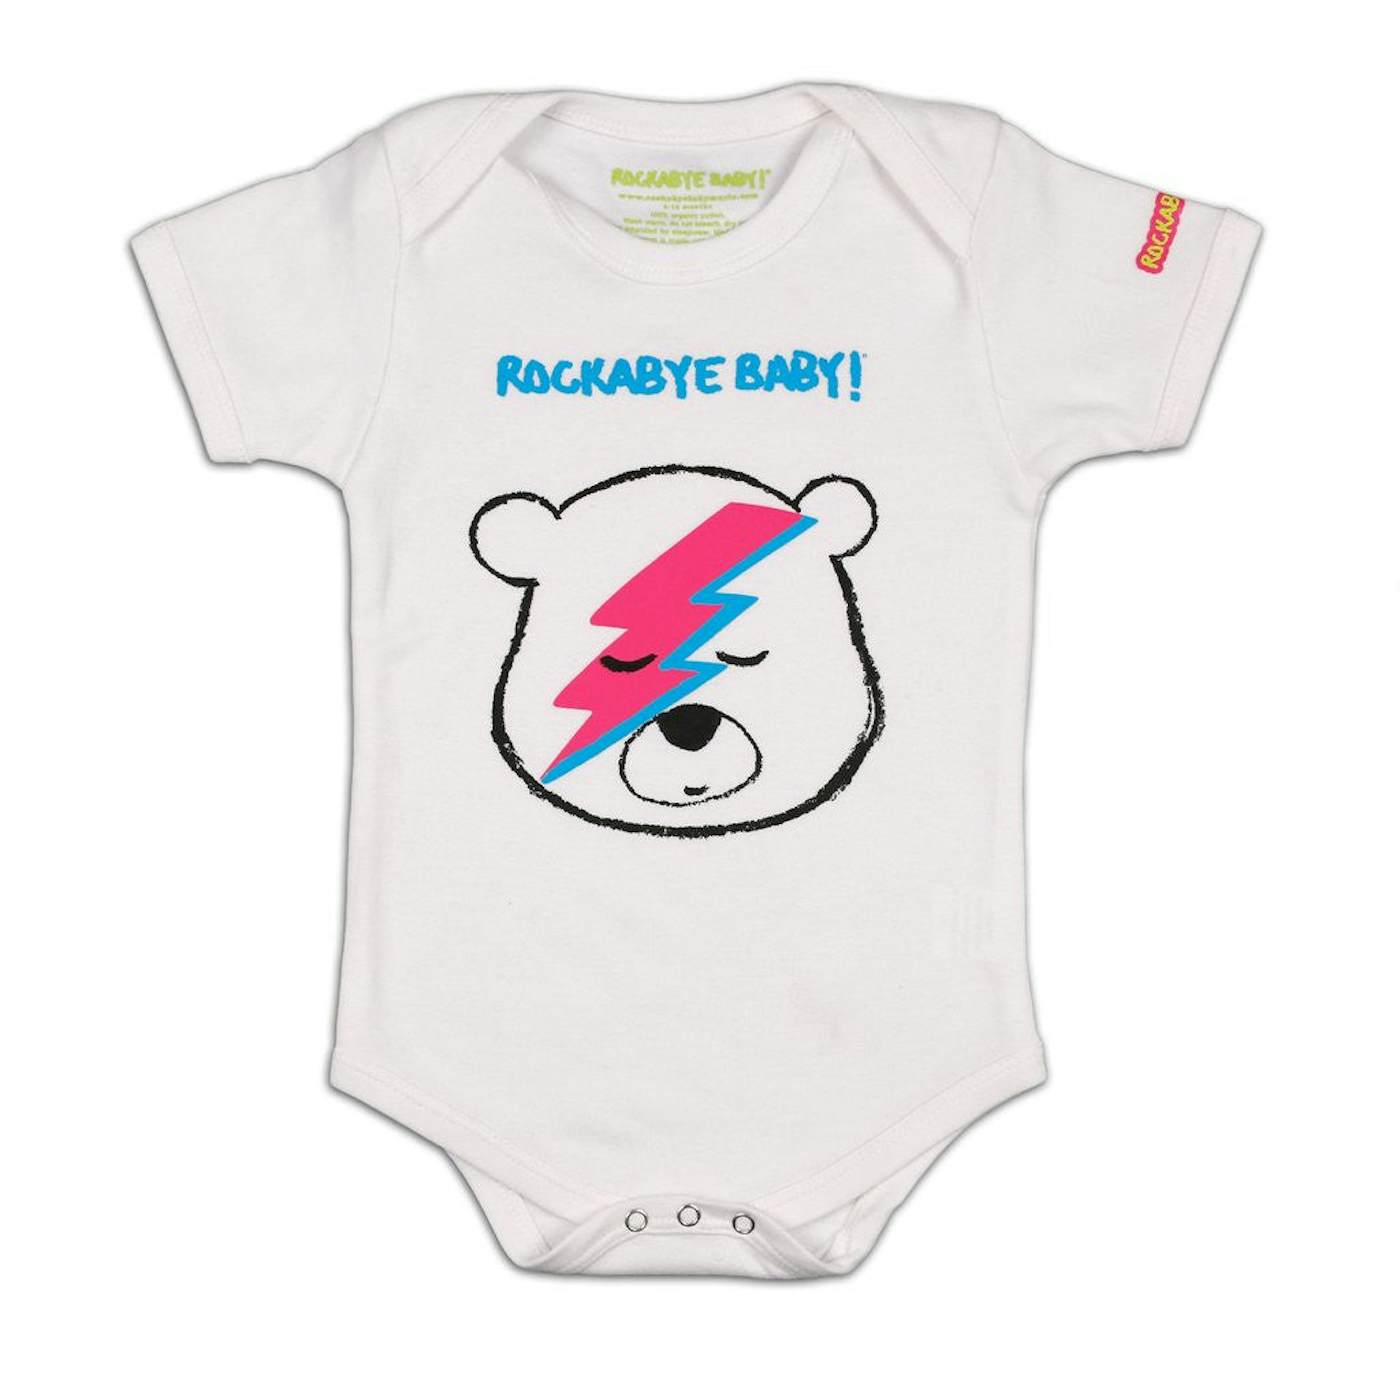 Rockabye Baby! Organic Baby Bodysuit ("Lullaby Renditions of David Bowie" Album Art on Black or White)